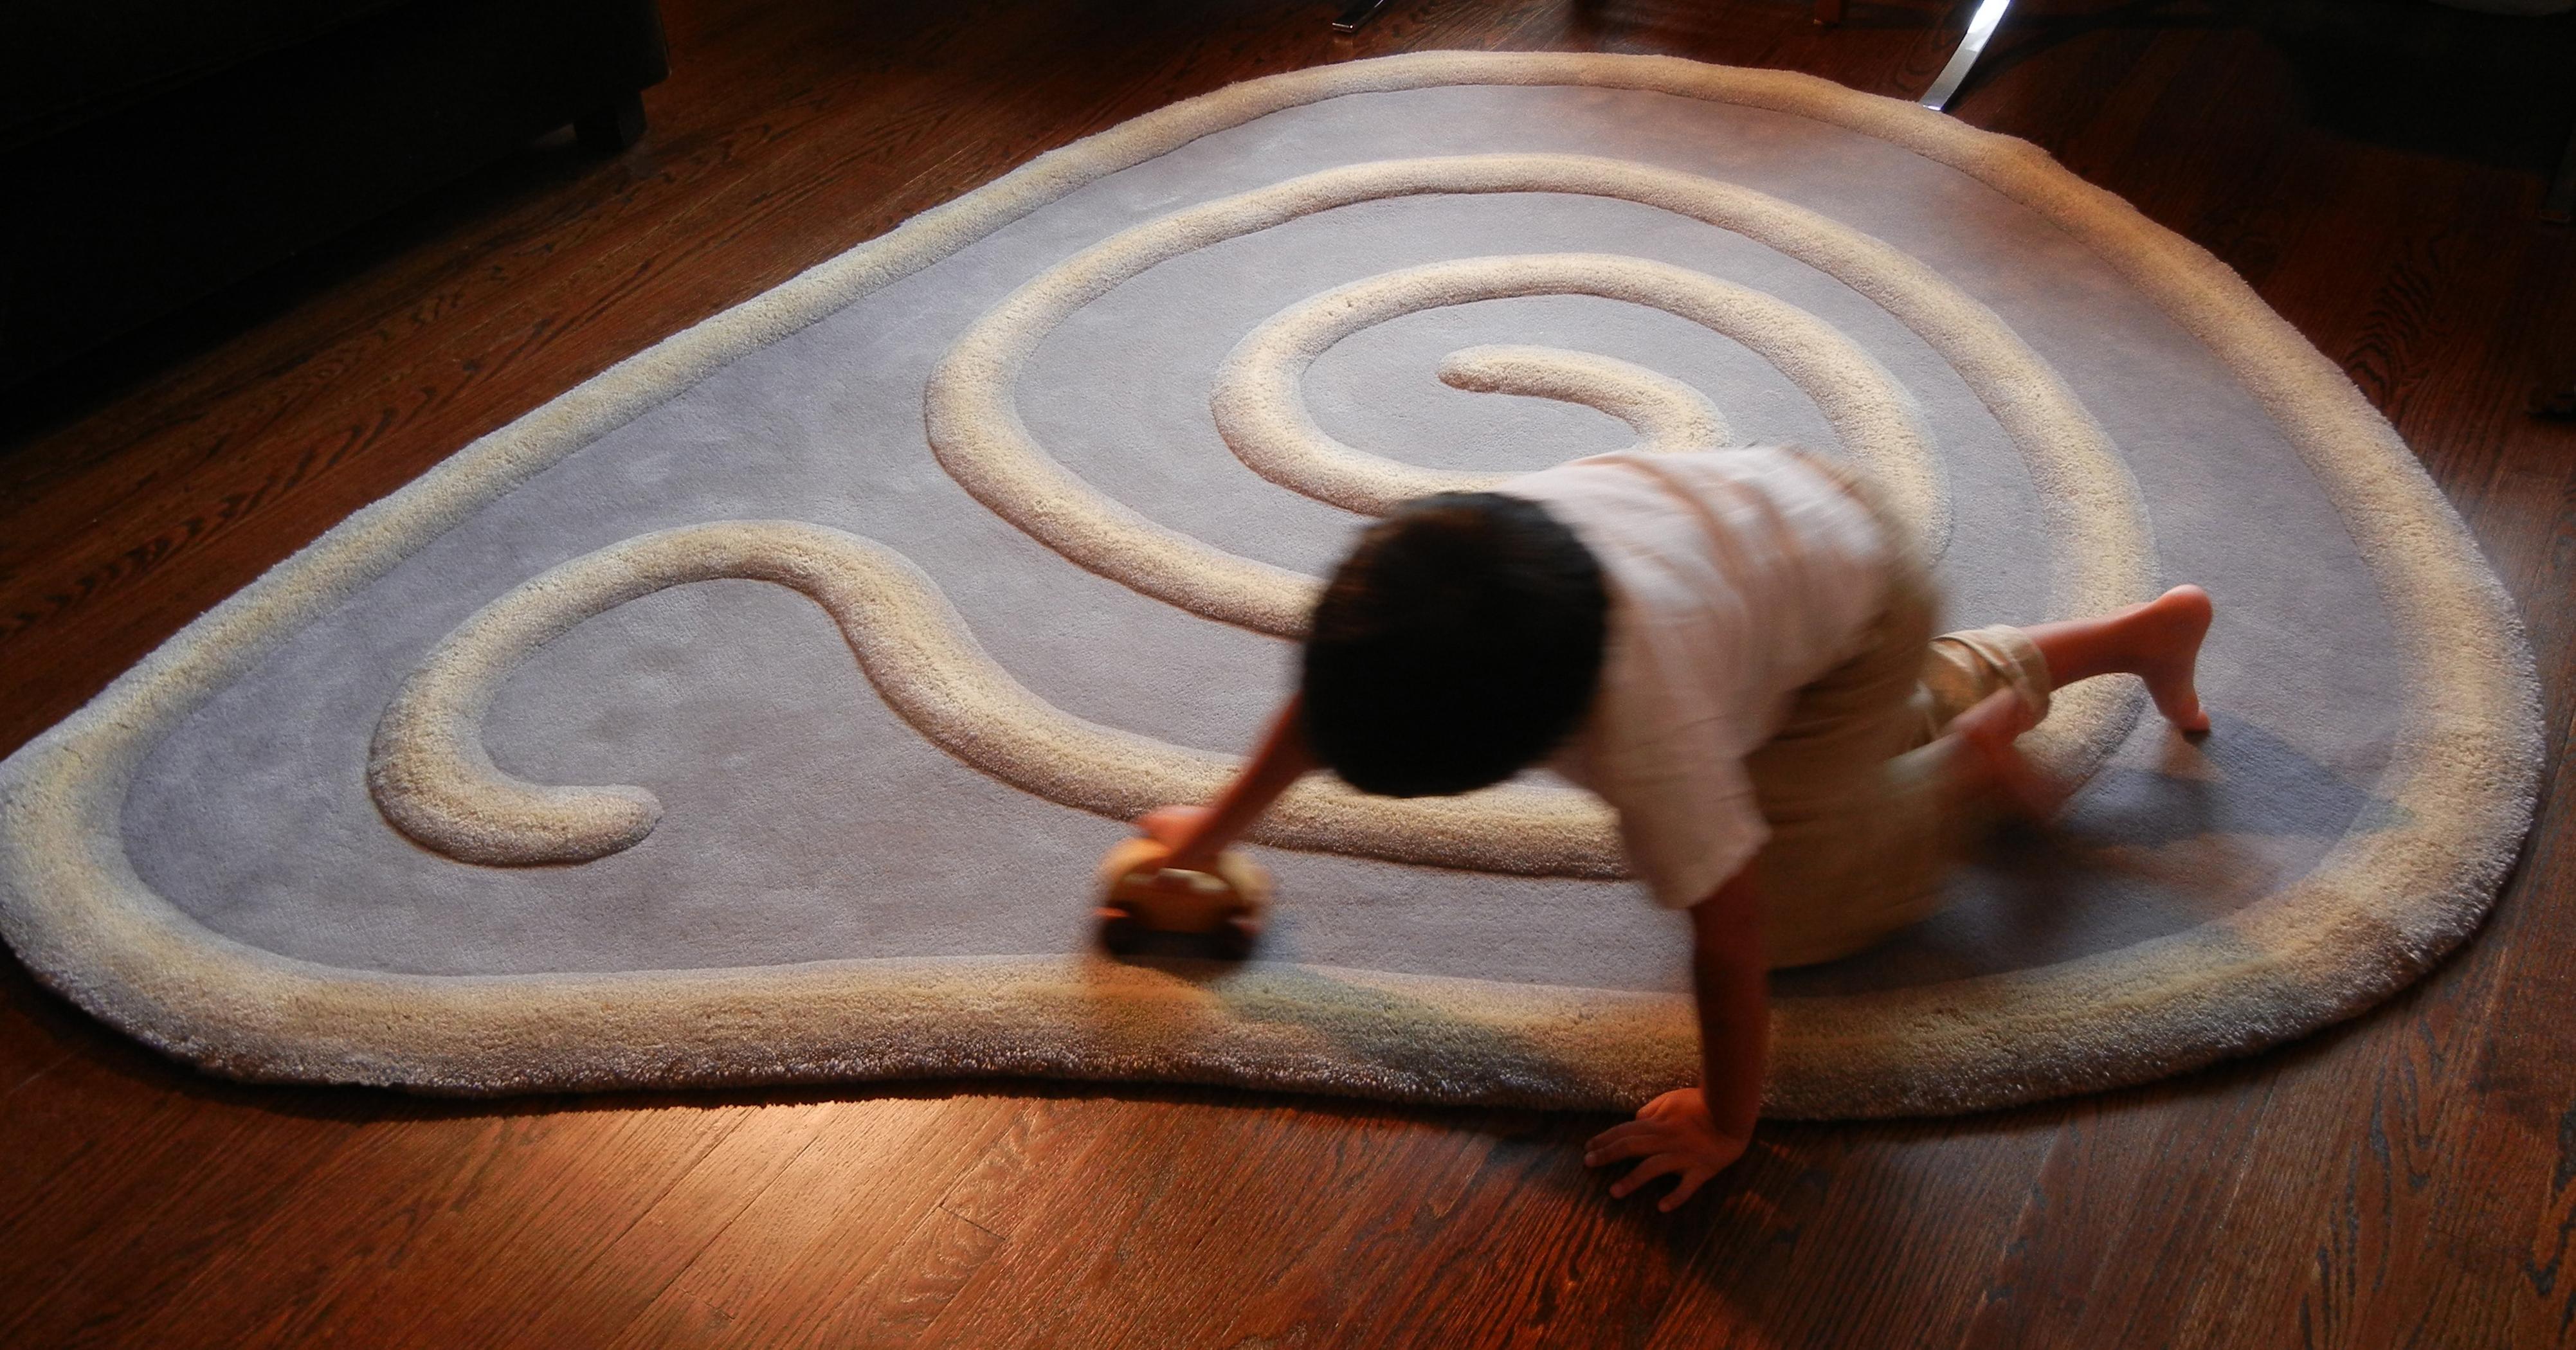 Handtufted wool. 'Zoom' children's rug by Jody Harrow for Groundplans. Race cars on a carpet track to promote hand-eye coordination while having fun. 

Available as a 5' x 4'6